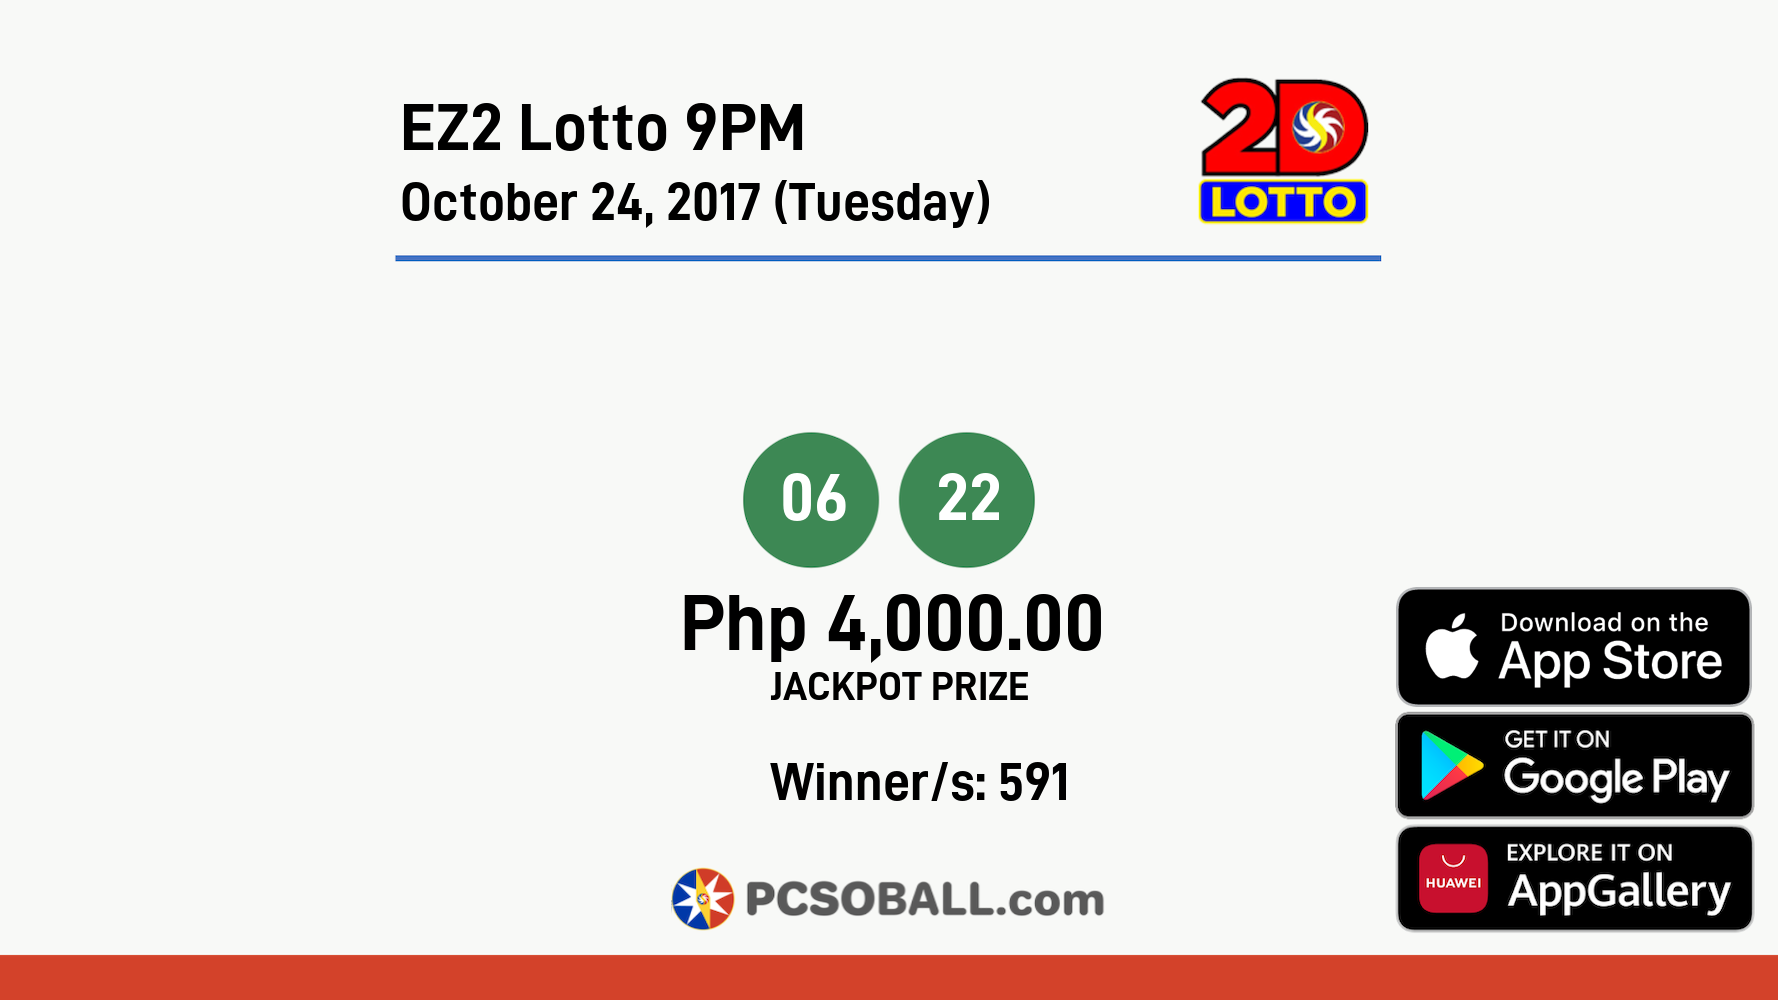 EZ2 Lotto 9PM October 24, 2017 (Tuesday) Result